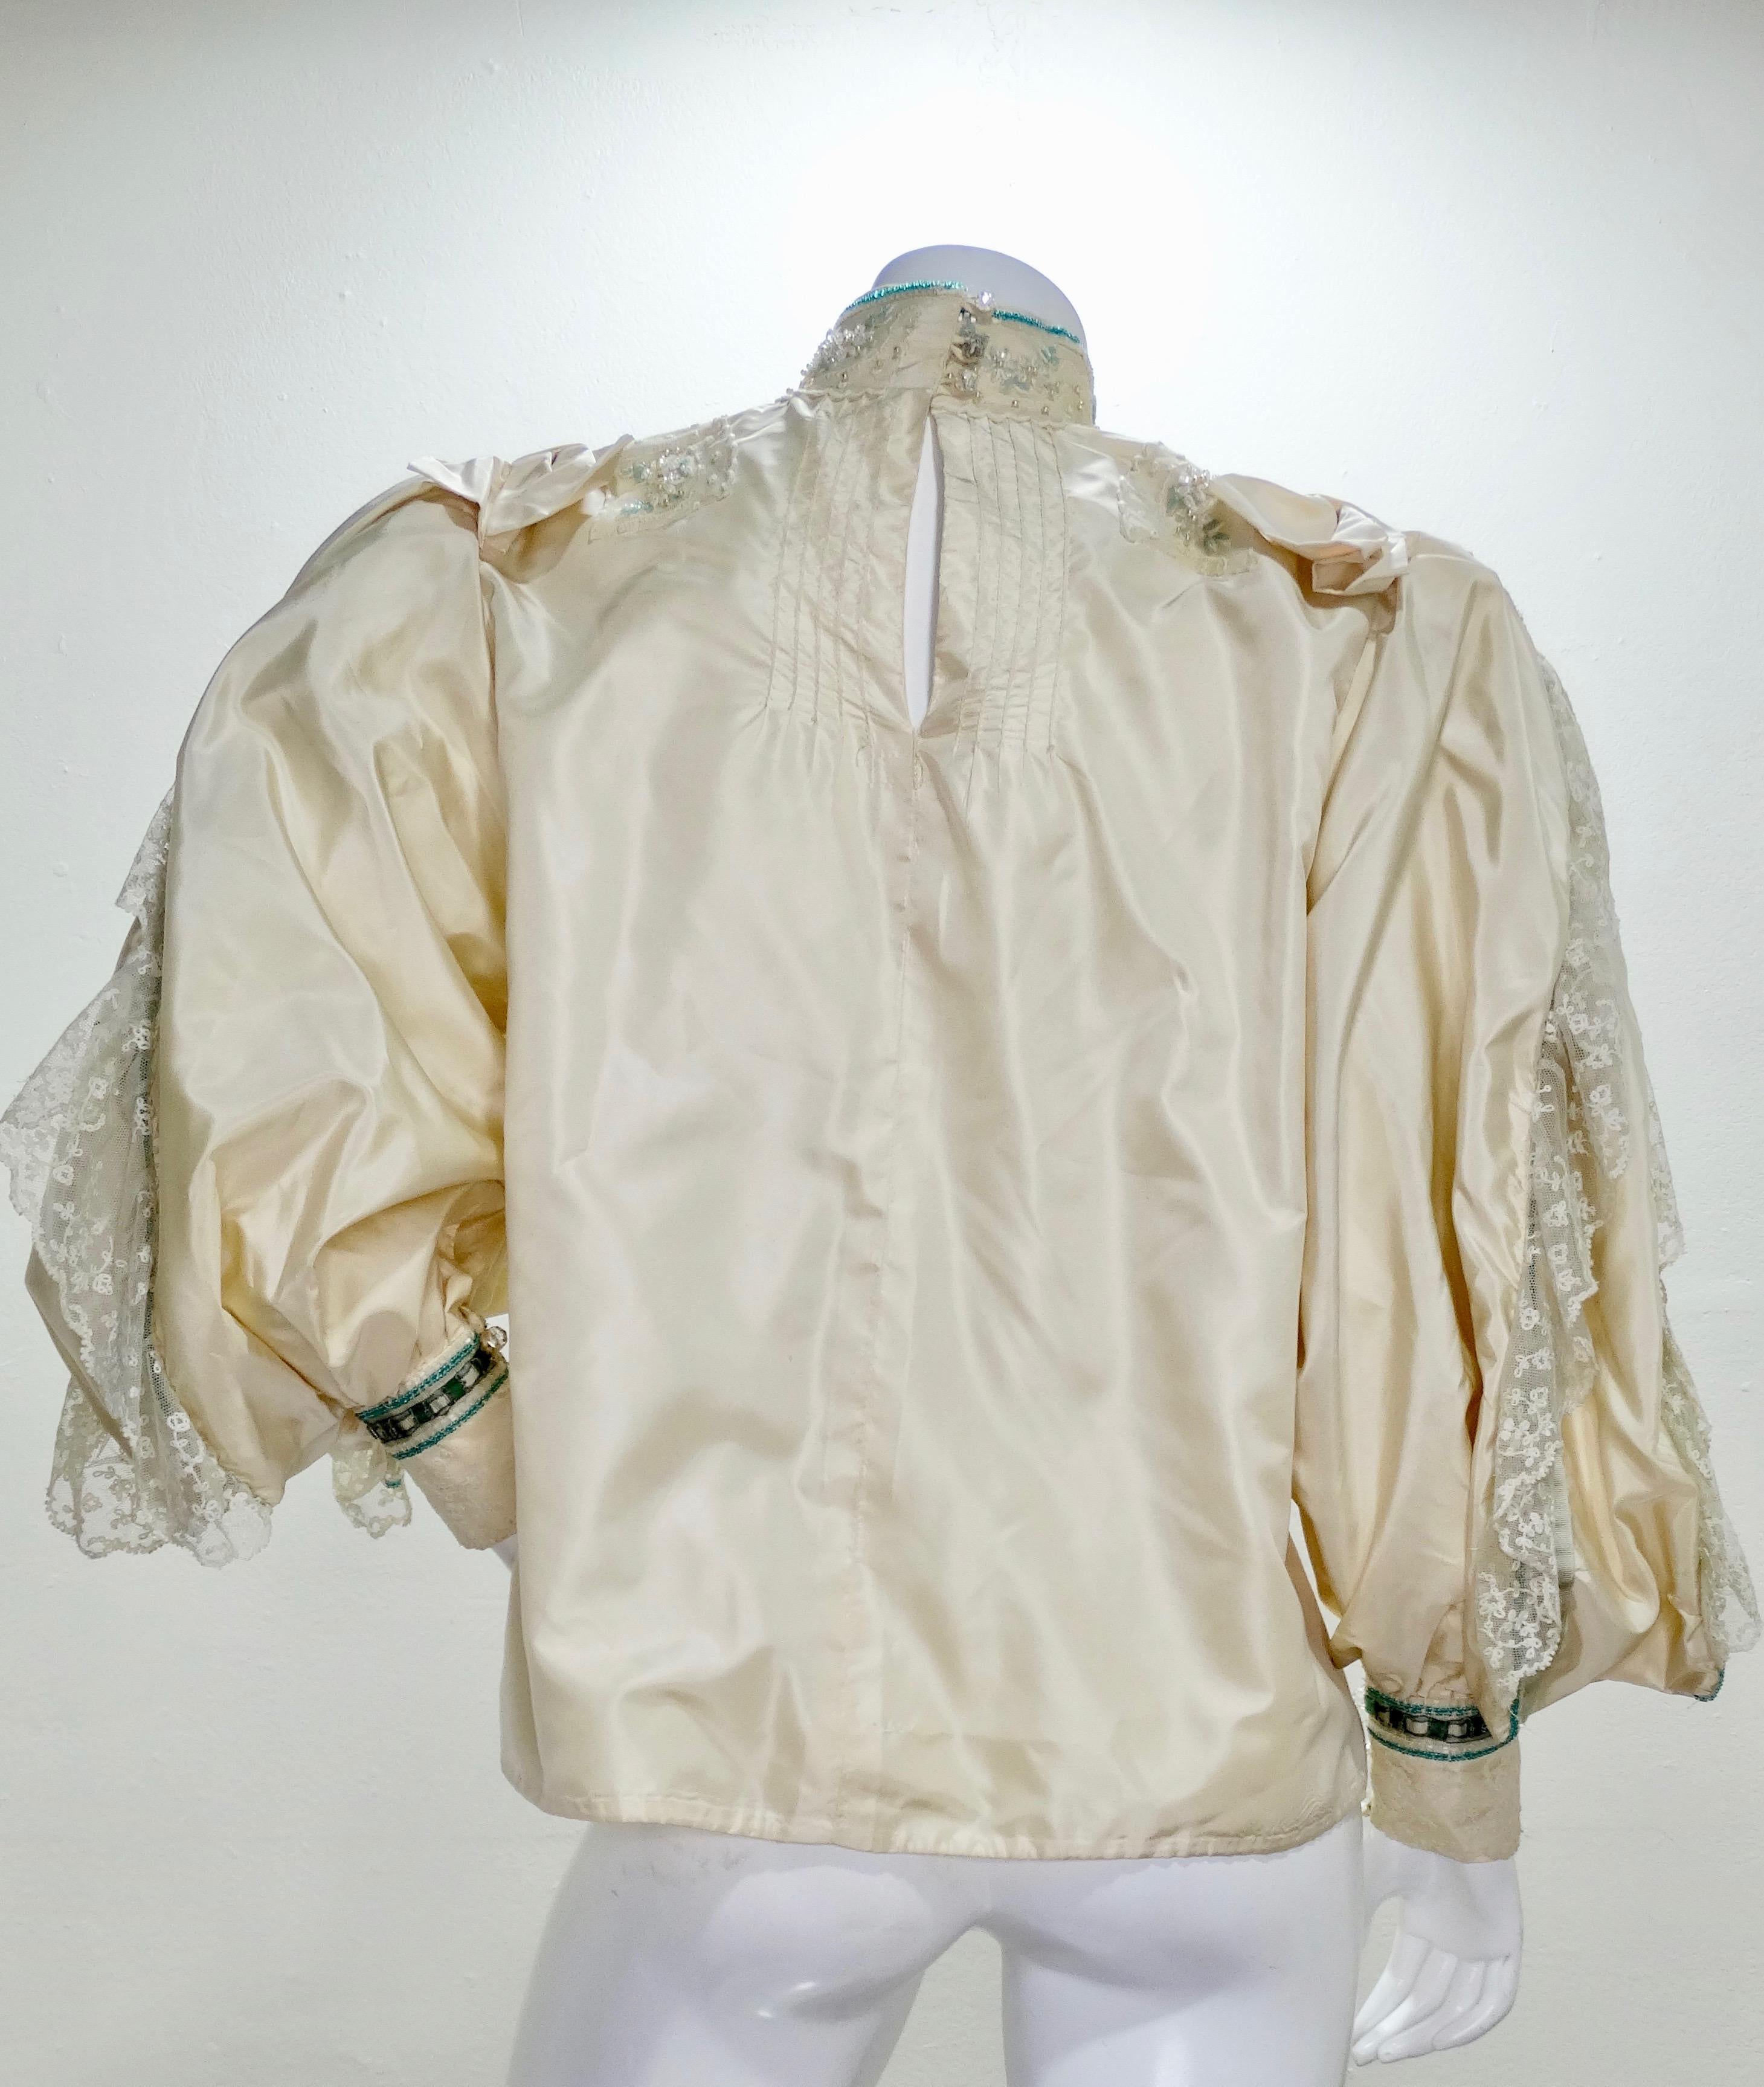 Eavis & Brown Embellished Victorian Blouse  In Good Condition For Sale In Scottsdale, AZ